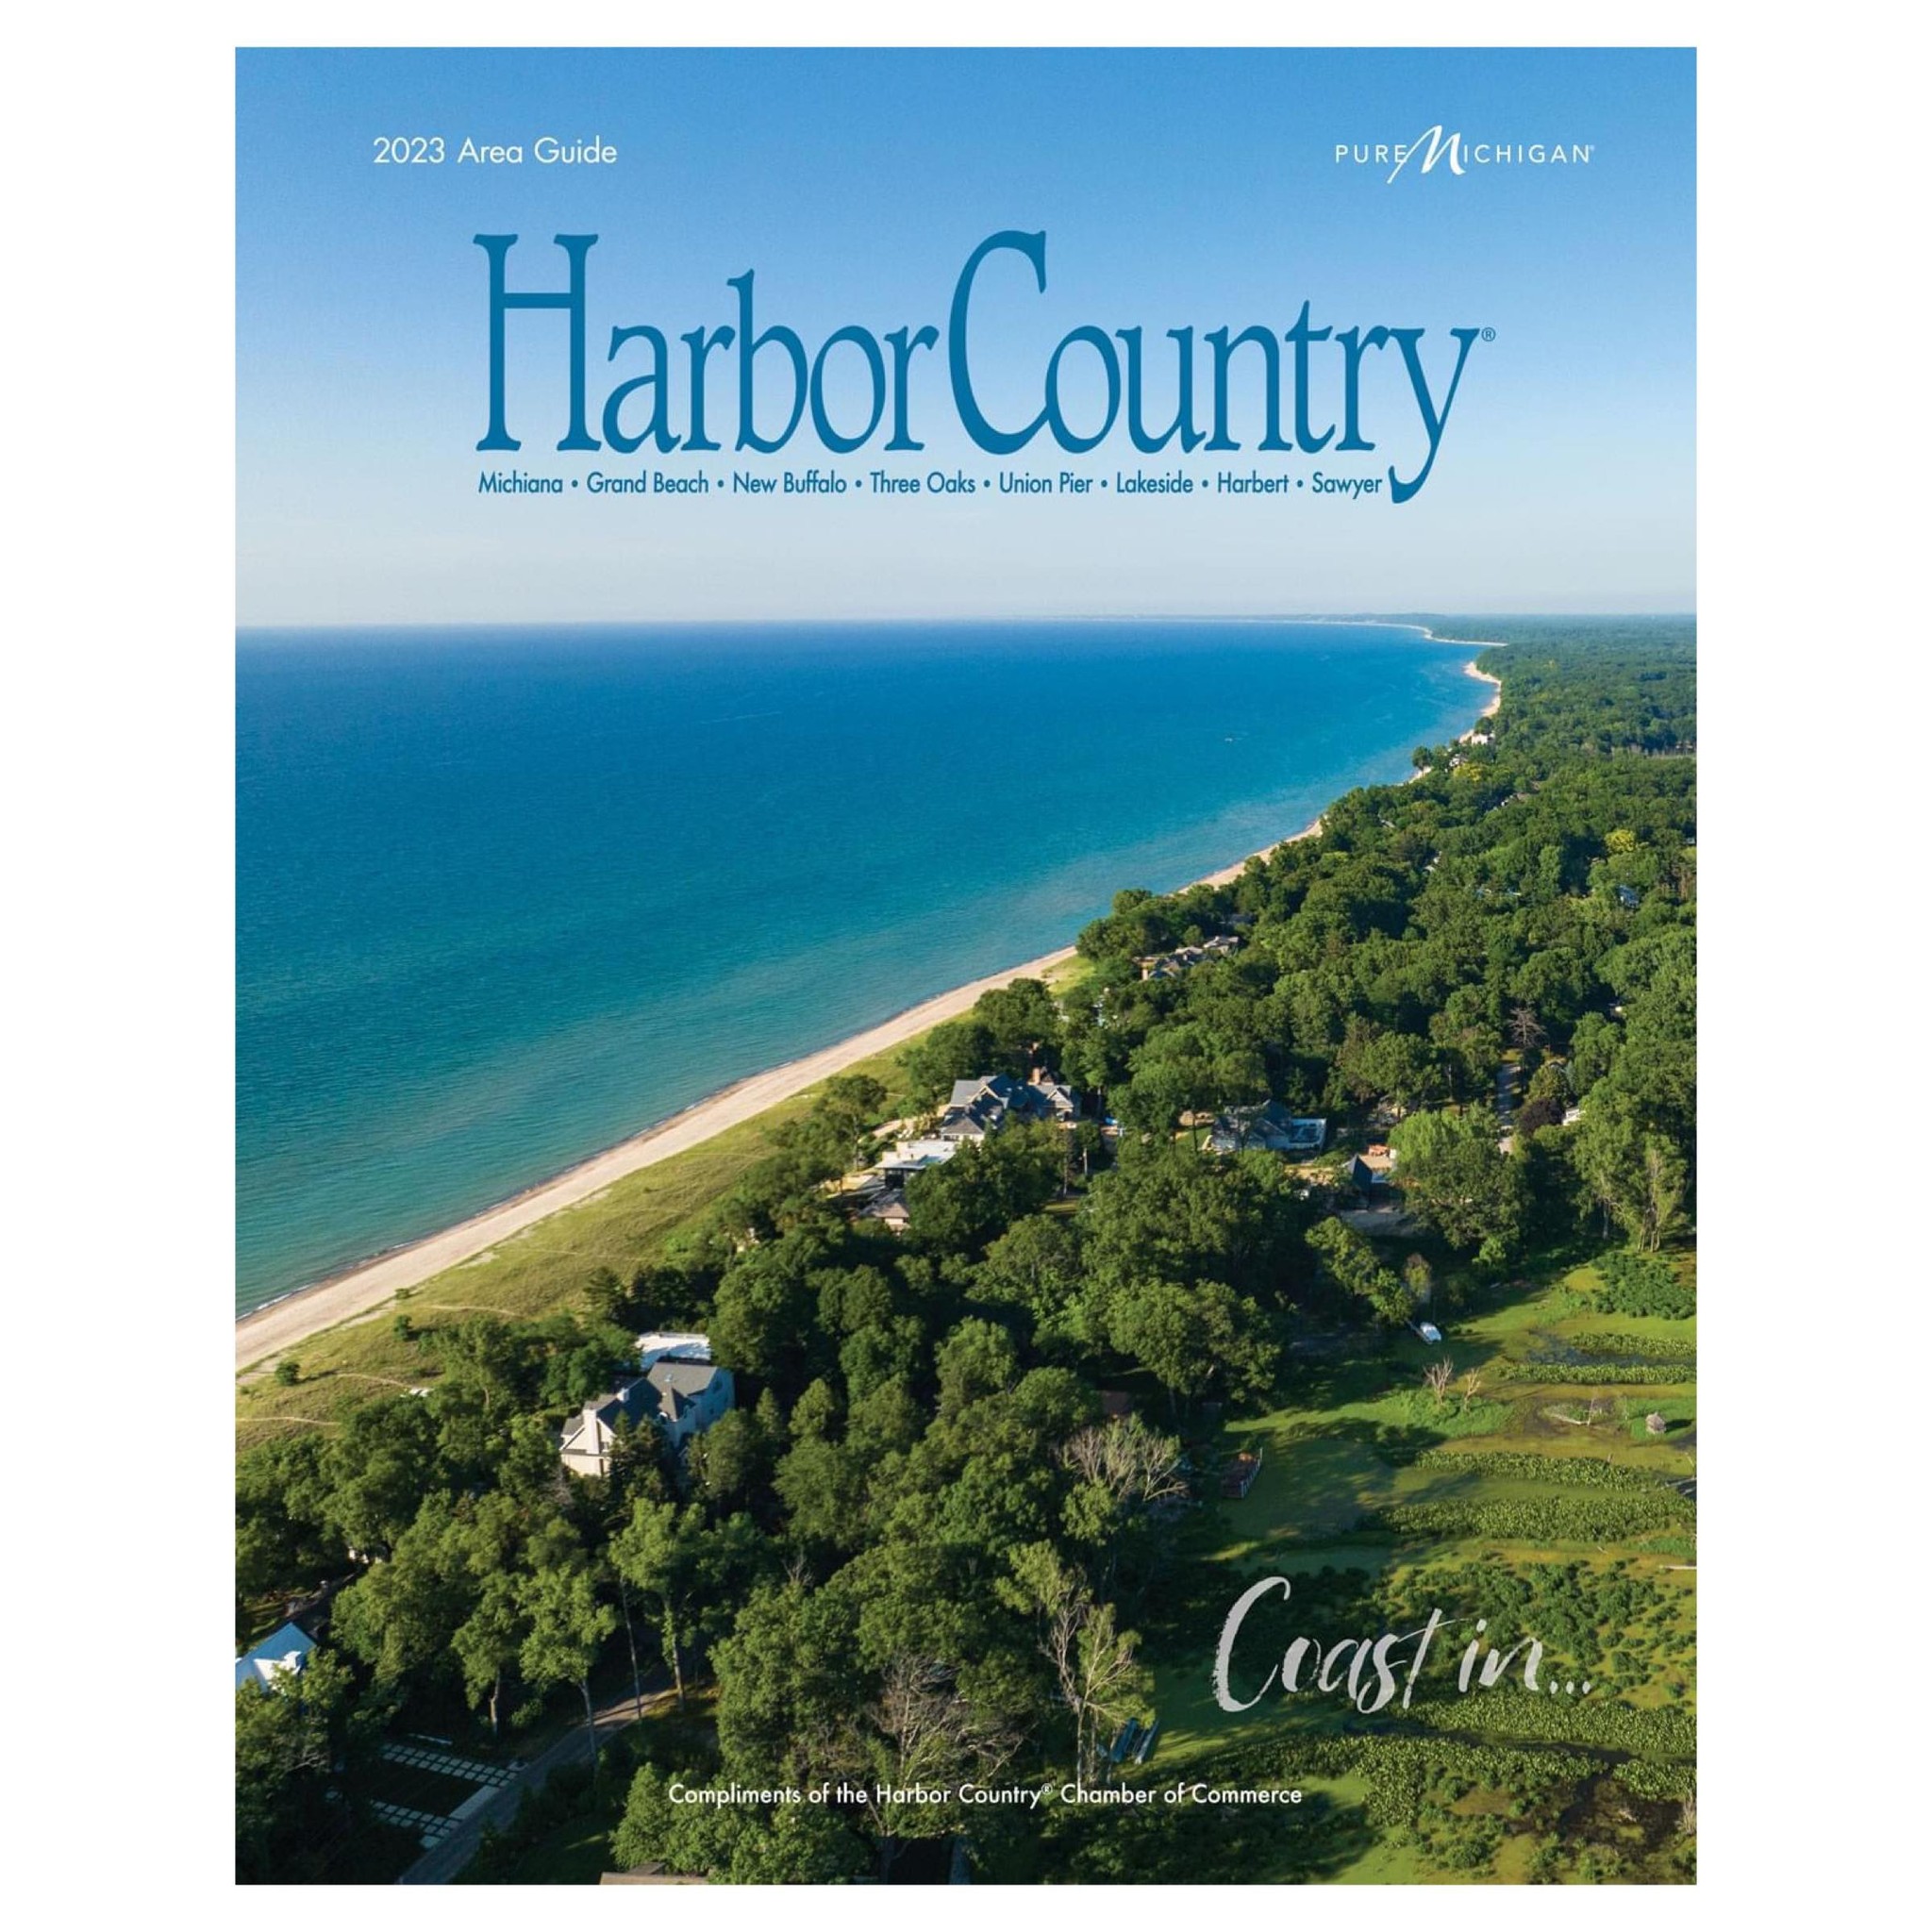 2023-harbor-country-guide-cover-6442125